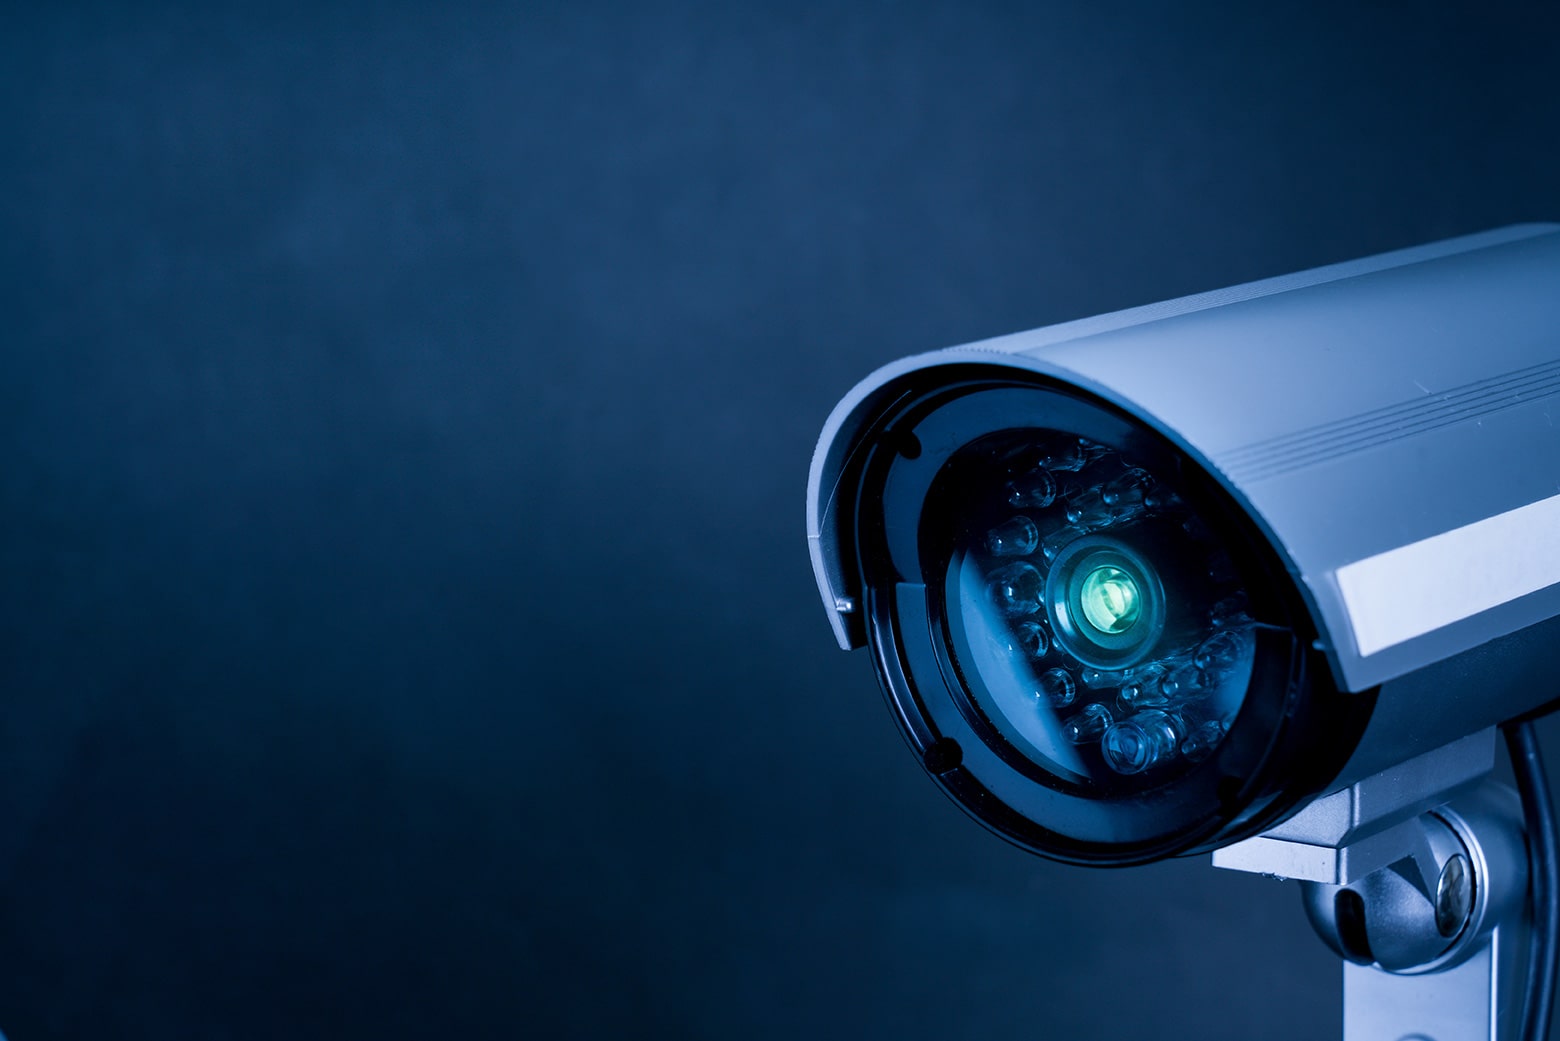 SECURITY CAMERAS ARE <strong>ONE-THIRD</strong> OF YOUR IOT <strong>ATTACK SURFACE</strong>